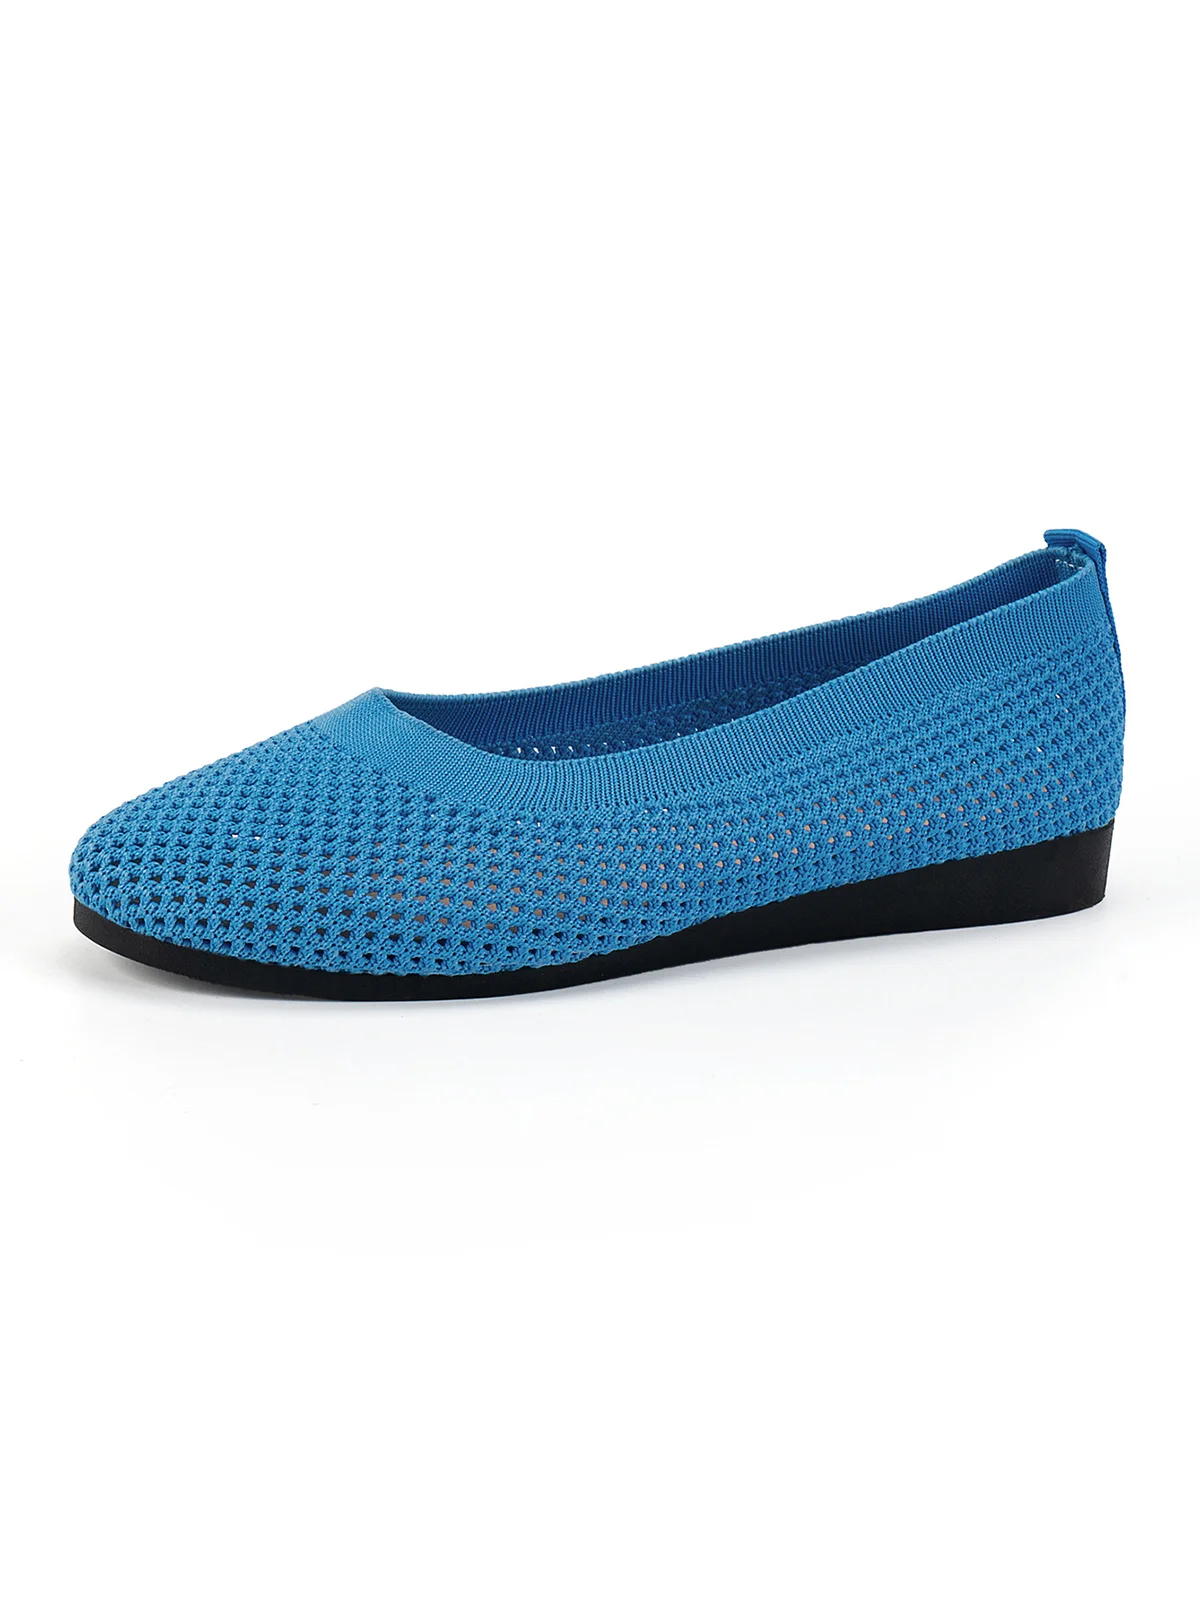 Breathable Hollow out Mesh Fabric Casual Shallow Shoes | noracora